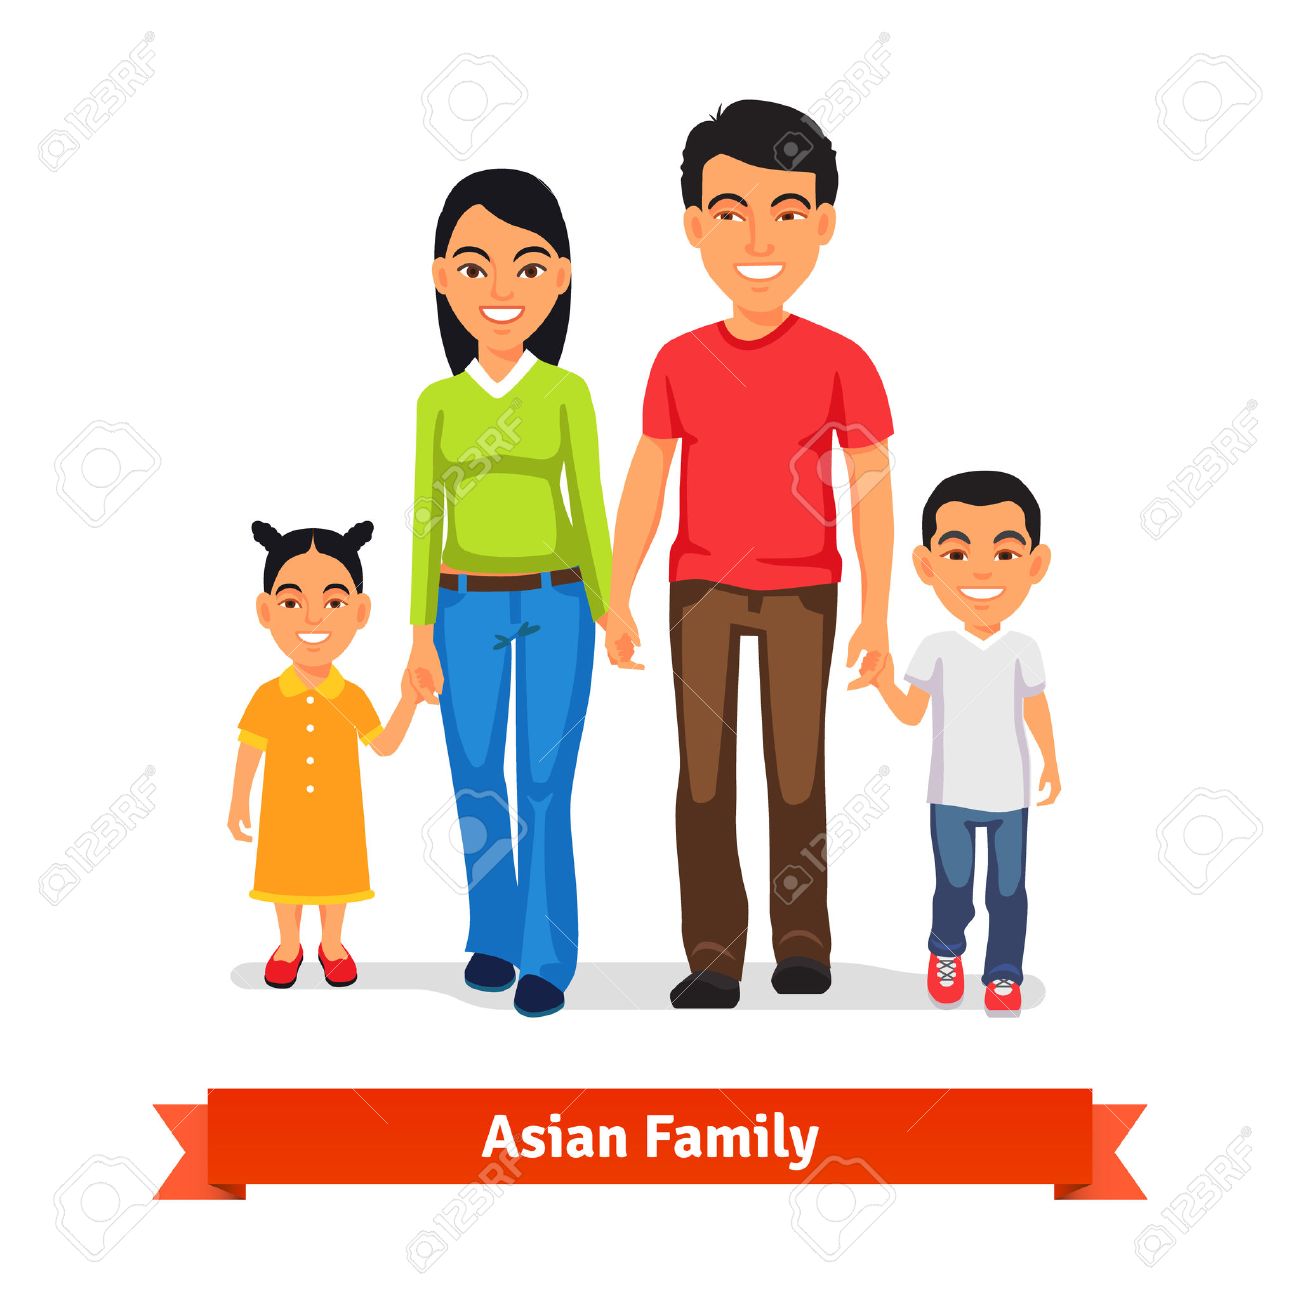 2435 Asian free clipart.